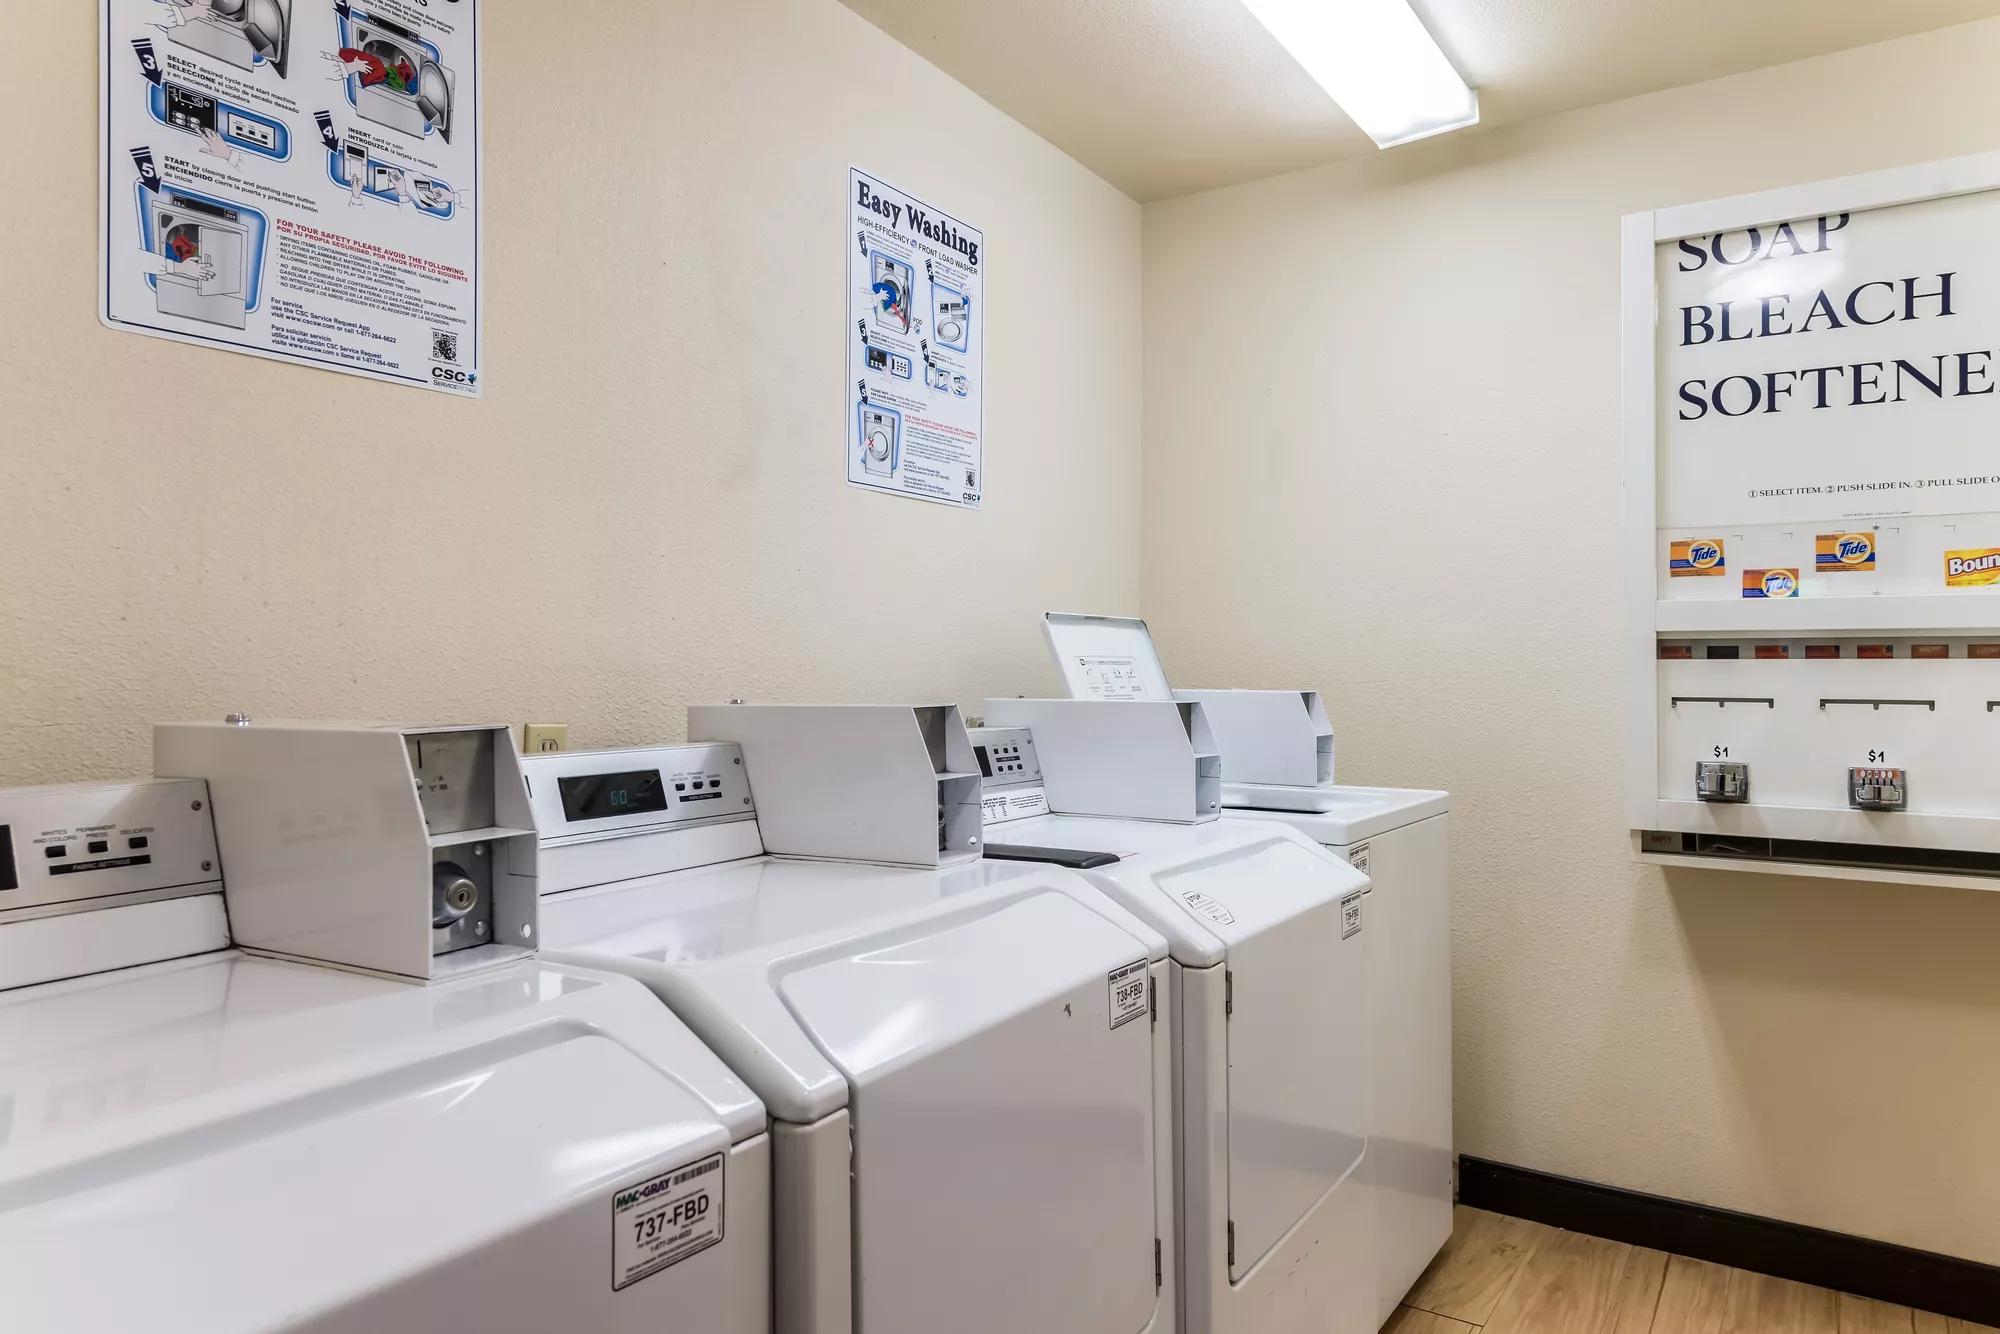 Red Roof Inn Seattle Airport - SEATAC Guest Coin Laundry Facility Image